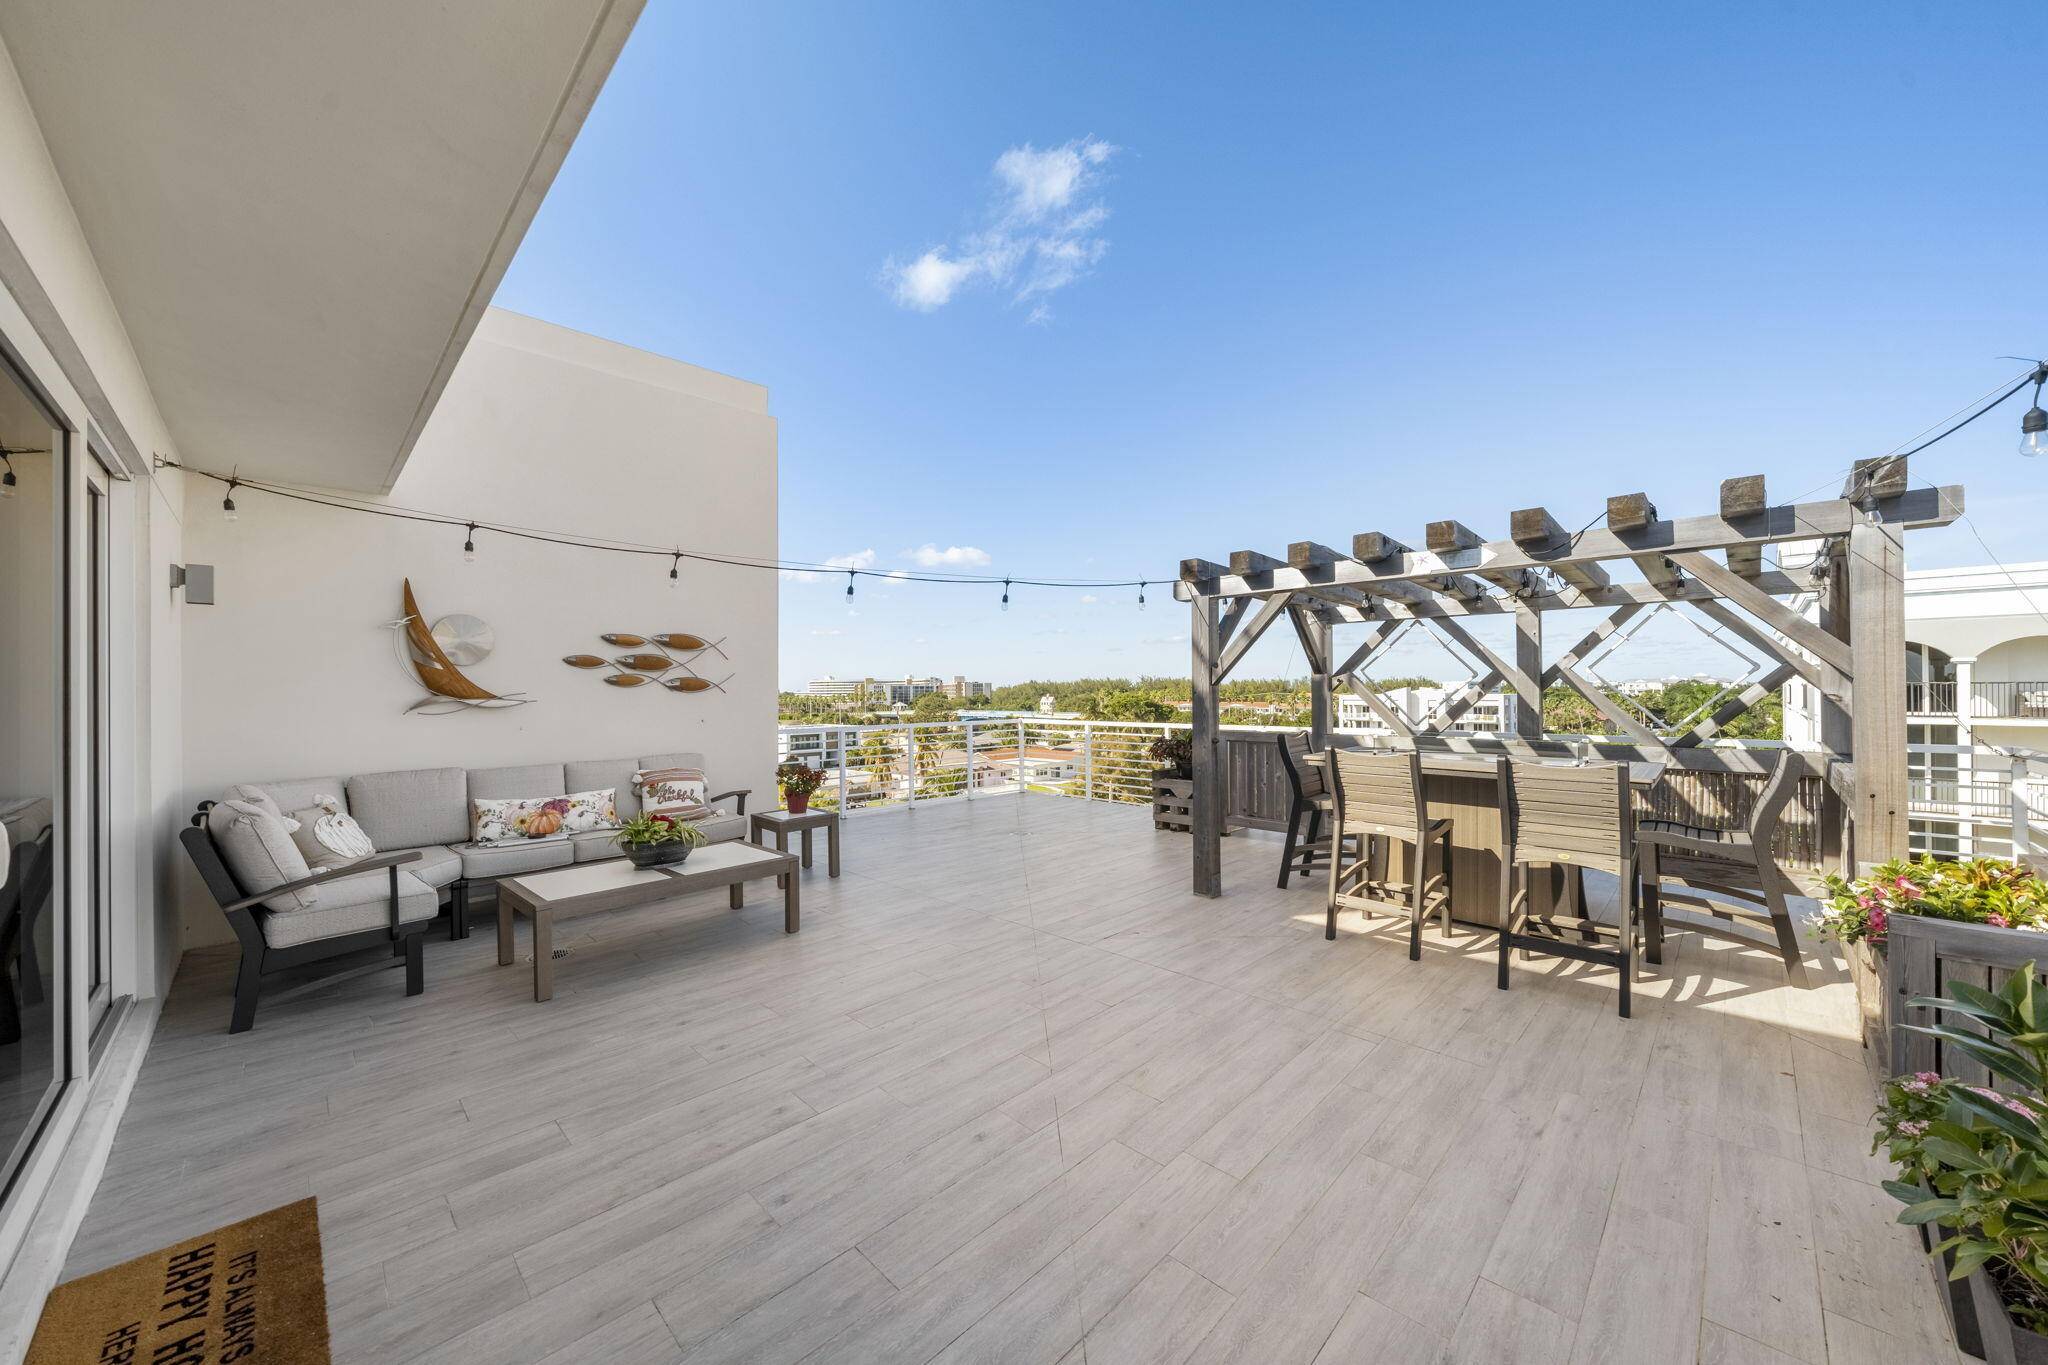 THAT'S IT ! YOUR OPPORTUNITY TO OWN THIS BEAUTIFUL PENTHOUSE 360 DEGREES OF INTRACOASRAL AND OCEAN VIEWS.